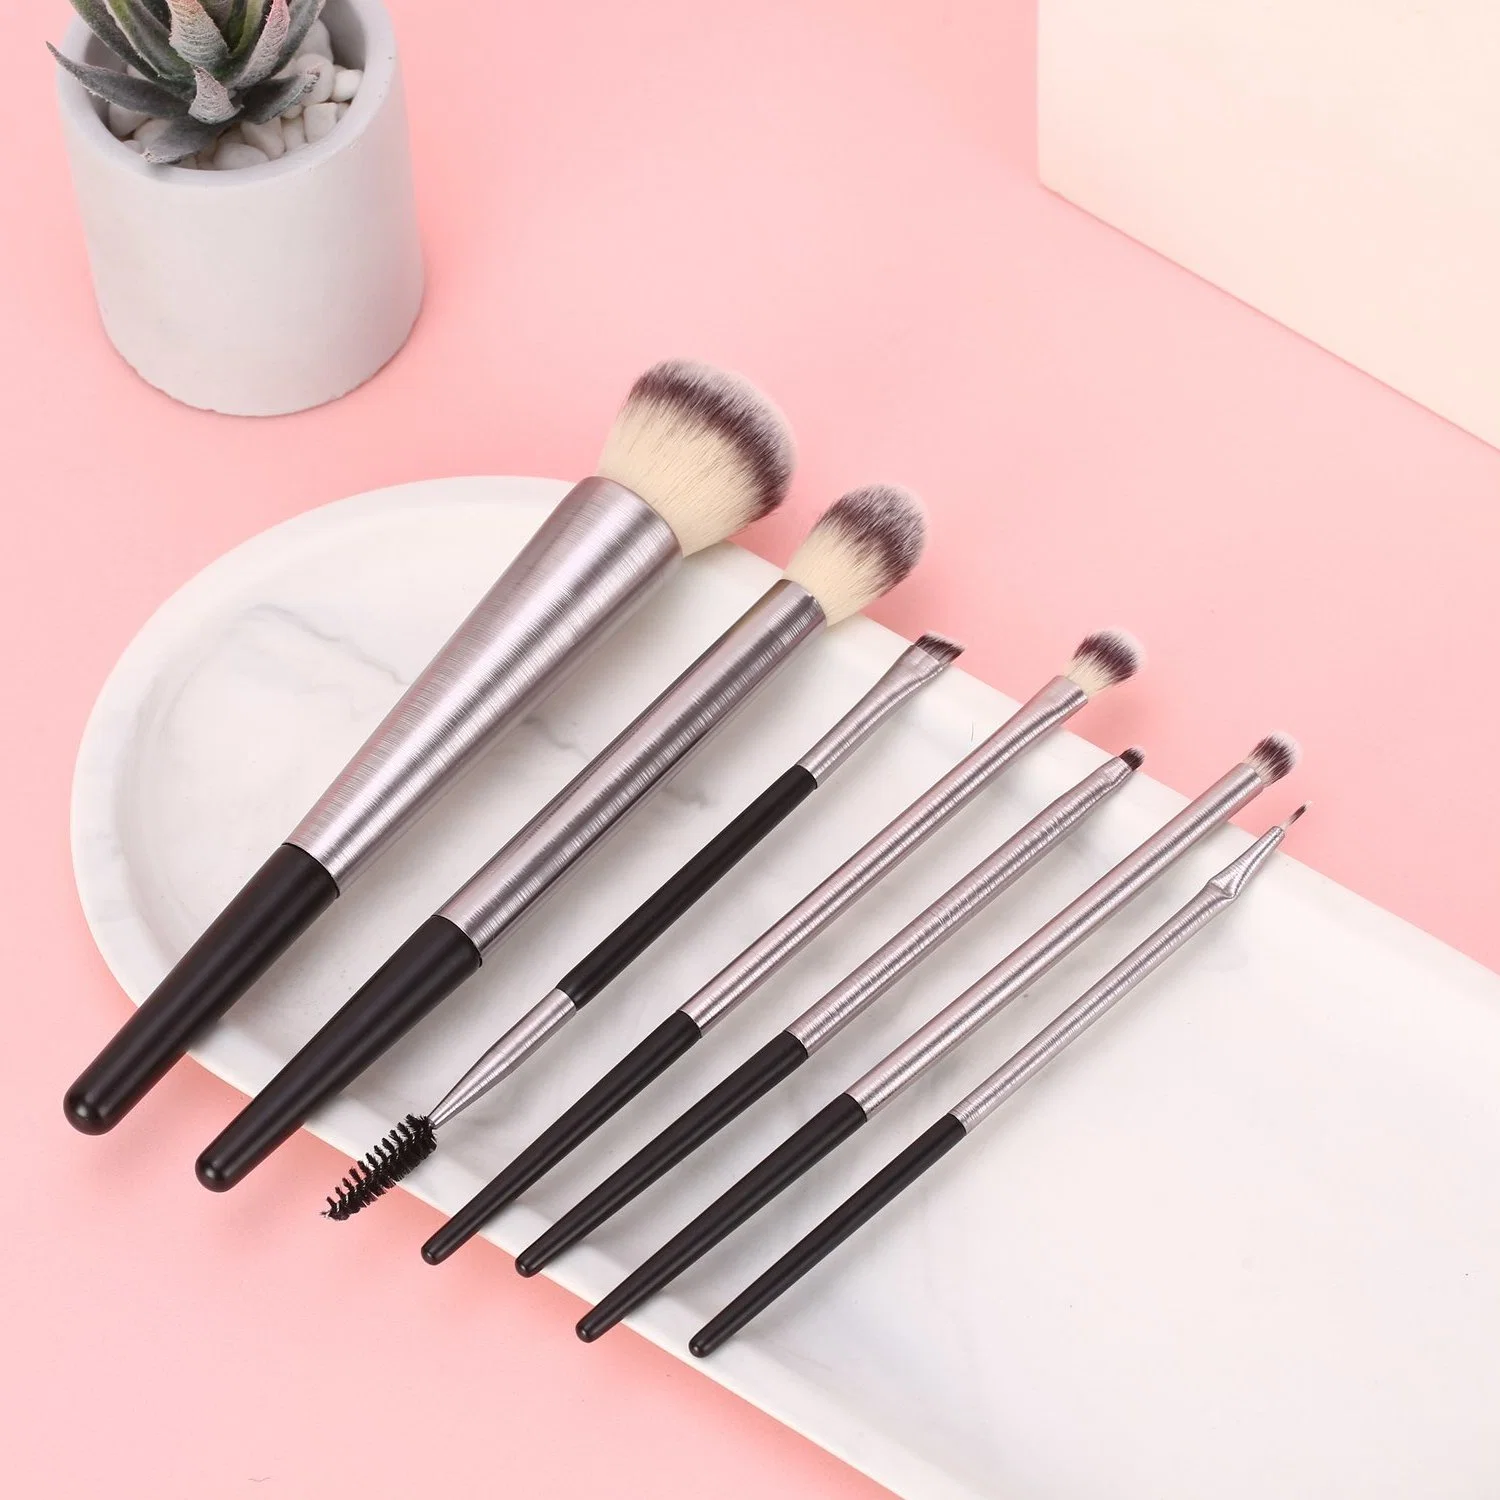 Professional Makeup Brush Cosmetic Beauty Tool Kits with Synthetic Hair Makeup Brush